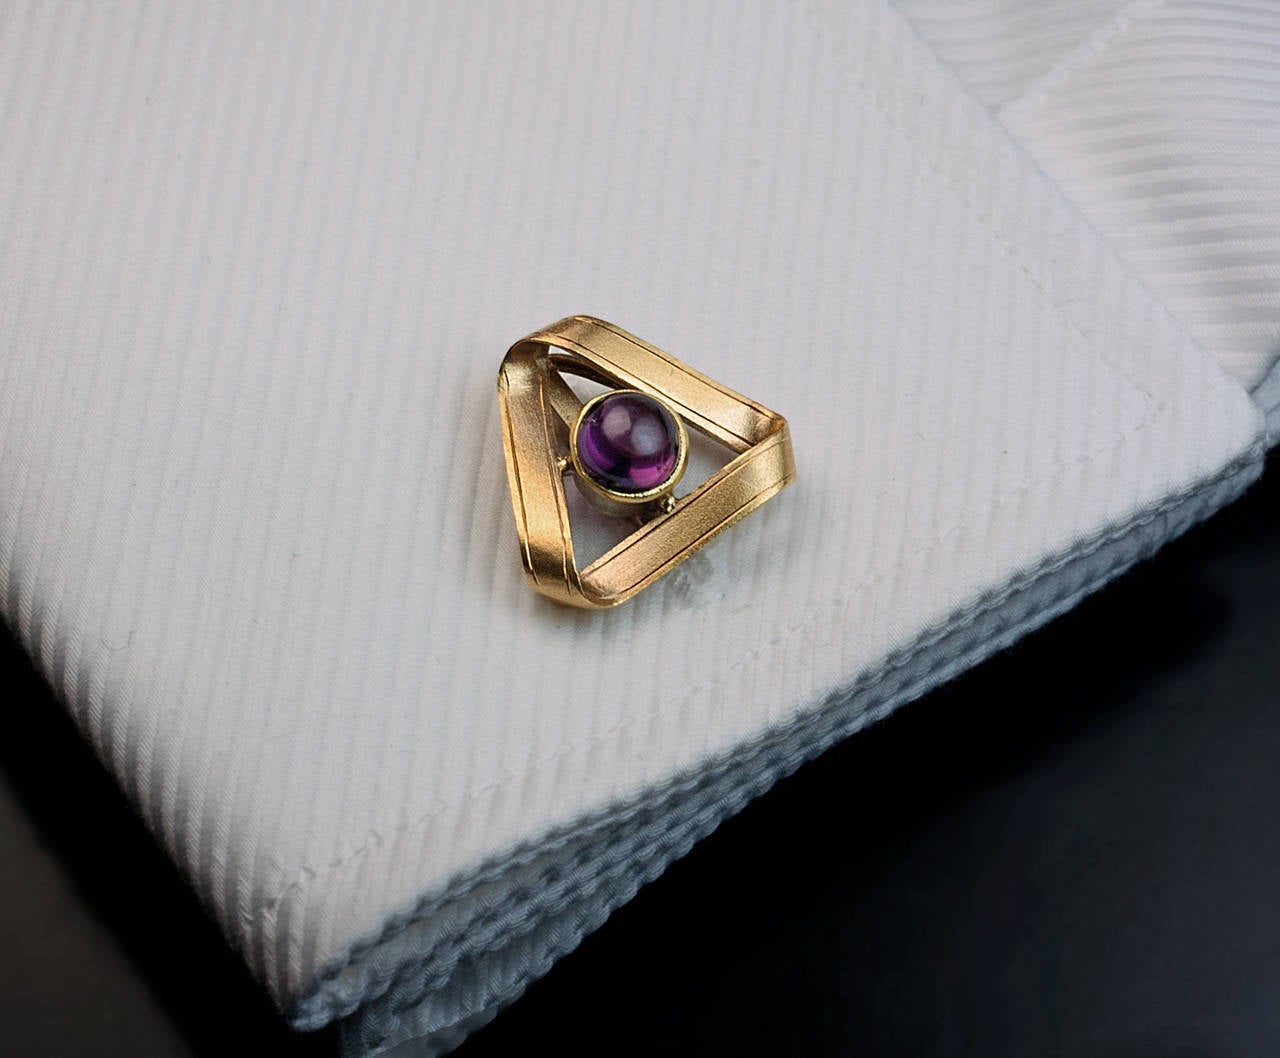 made in Moscow between 1908 and 1917

These unusual cufflinks are designed as twisted gold ribbons forming eternity triangles with bezel-set cabochon-cut rhodolite garnets in their centers.

Width 19 mm (3/4 in.)

Marked with 56 gold standard